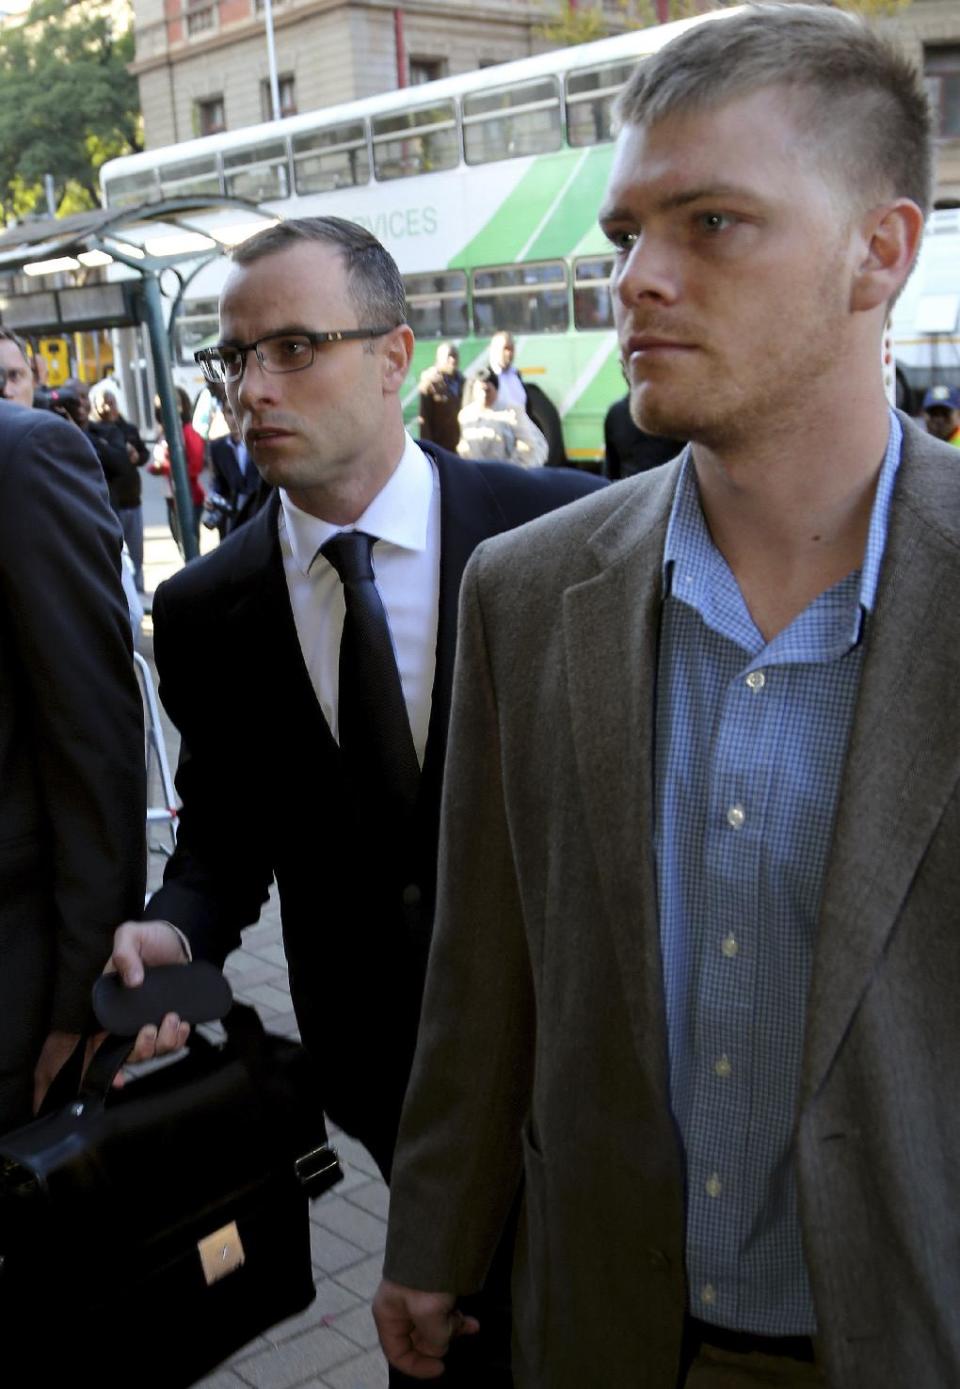 Oscar Pistorius, left, accompanied by an unidentified relative, walks towards the high court in Pretoria, South Africa, Wednesday, May 14, 2014. The chief prosecutor in the murder trial of Pistorius on Tuesday asked that the double-amputee runner be placed under psychiatric evaluation after an expert witness testified that he had an anxiety disorder. Pistorius is charged with murder for the shooting death of his girlfriend, Reeva Steenkamp, on Valentines Day in 2013. (AP Photo/Themba Hadebe)